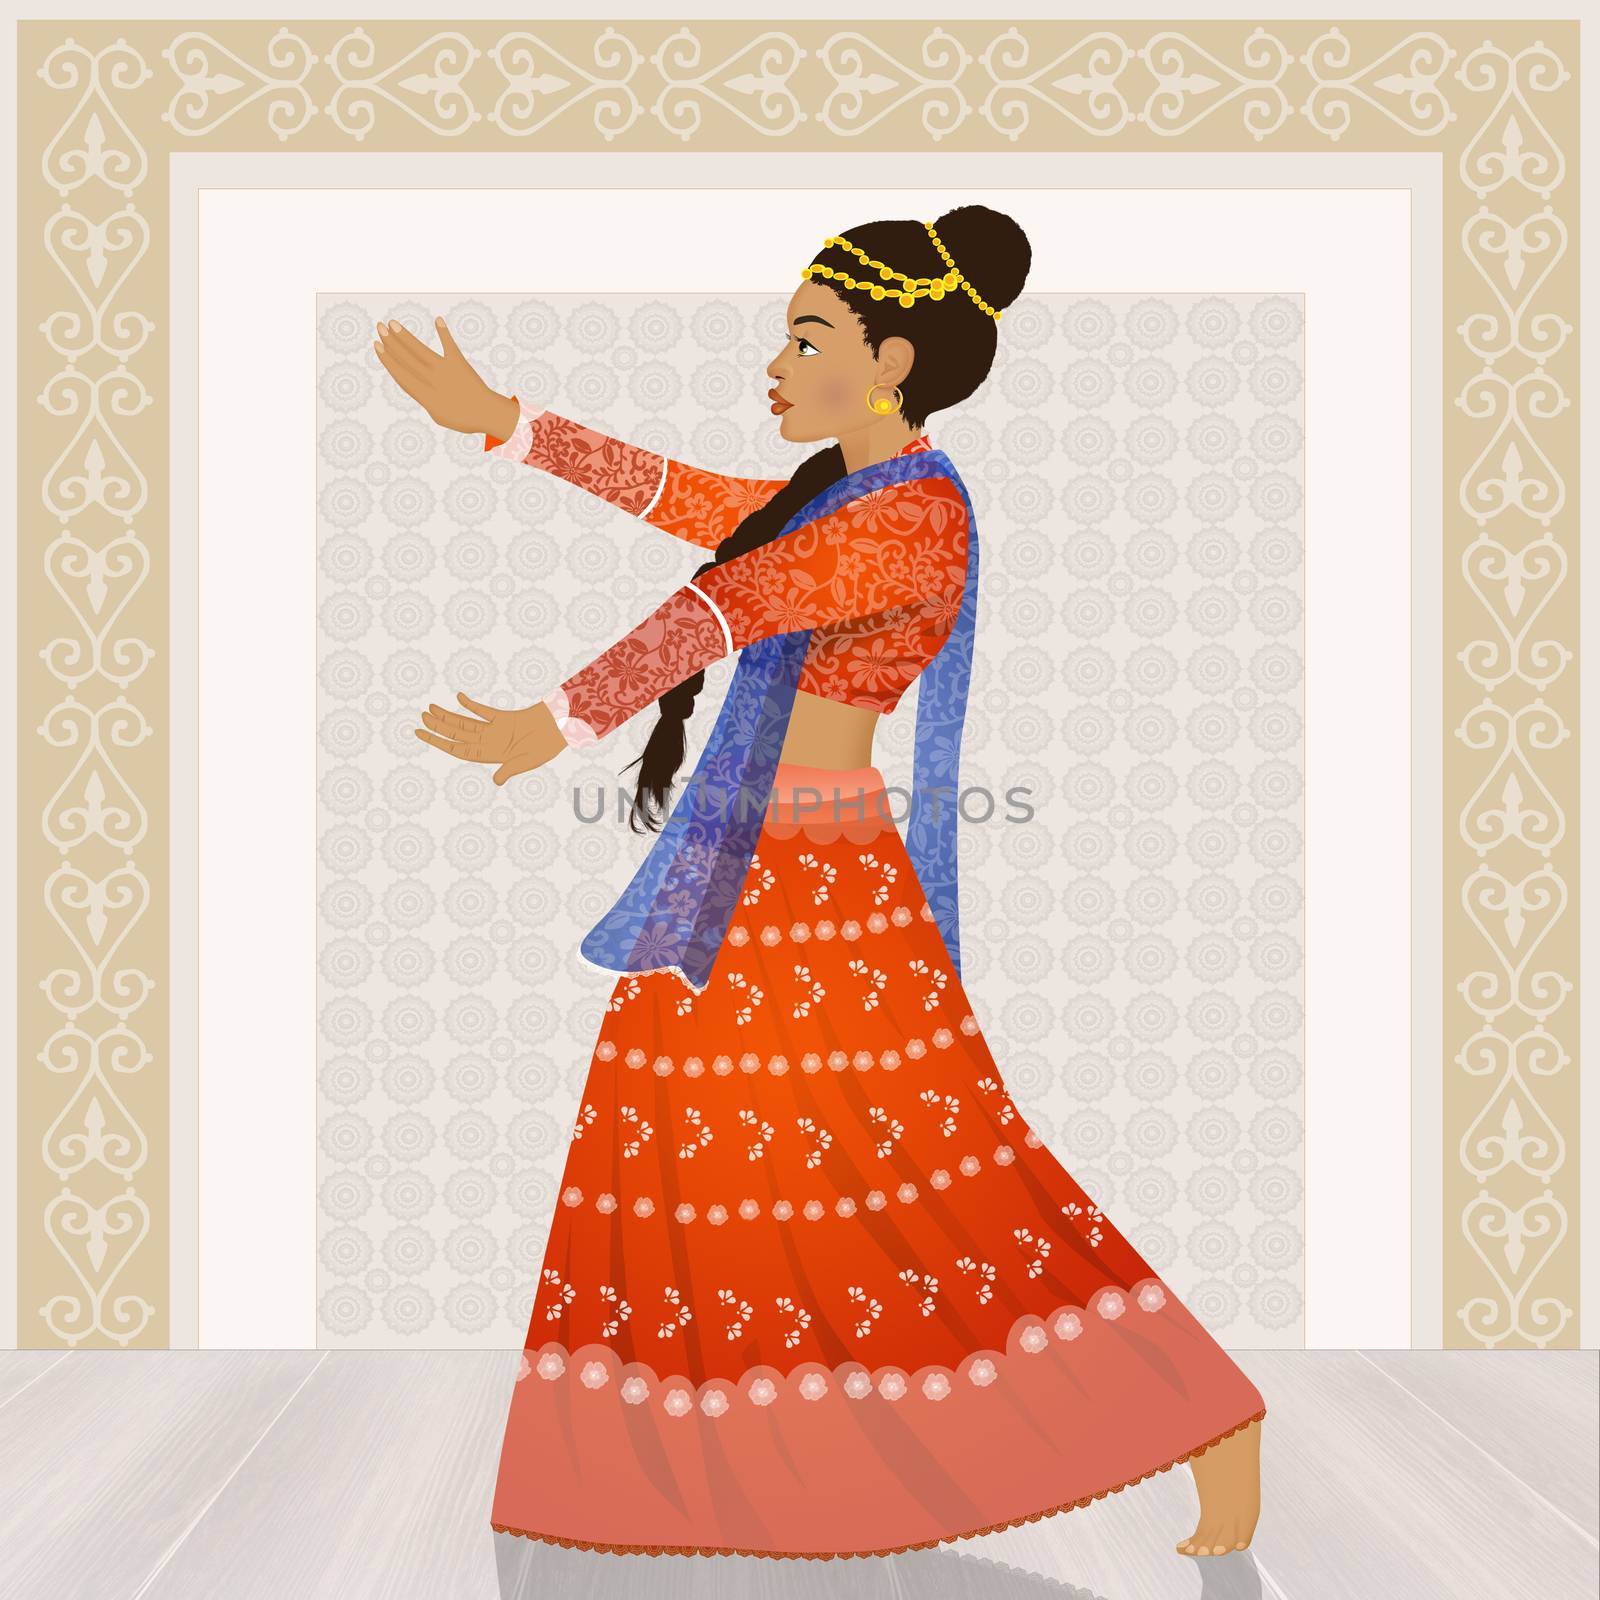 illustration of traditional Indian dance